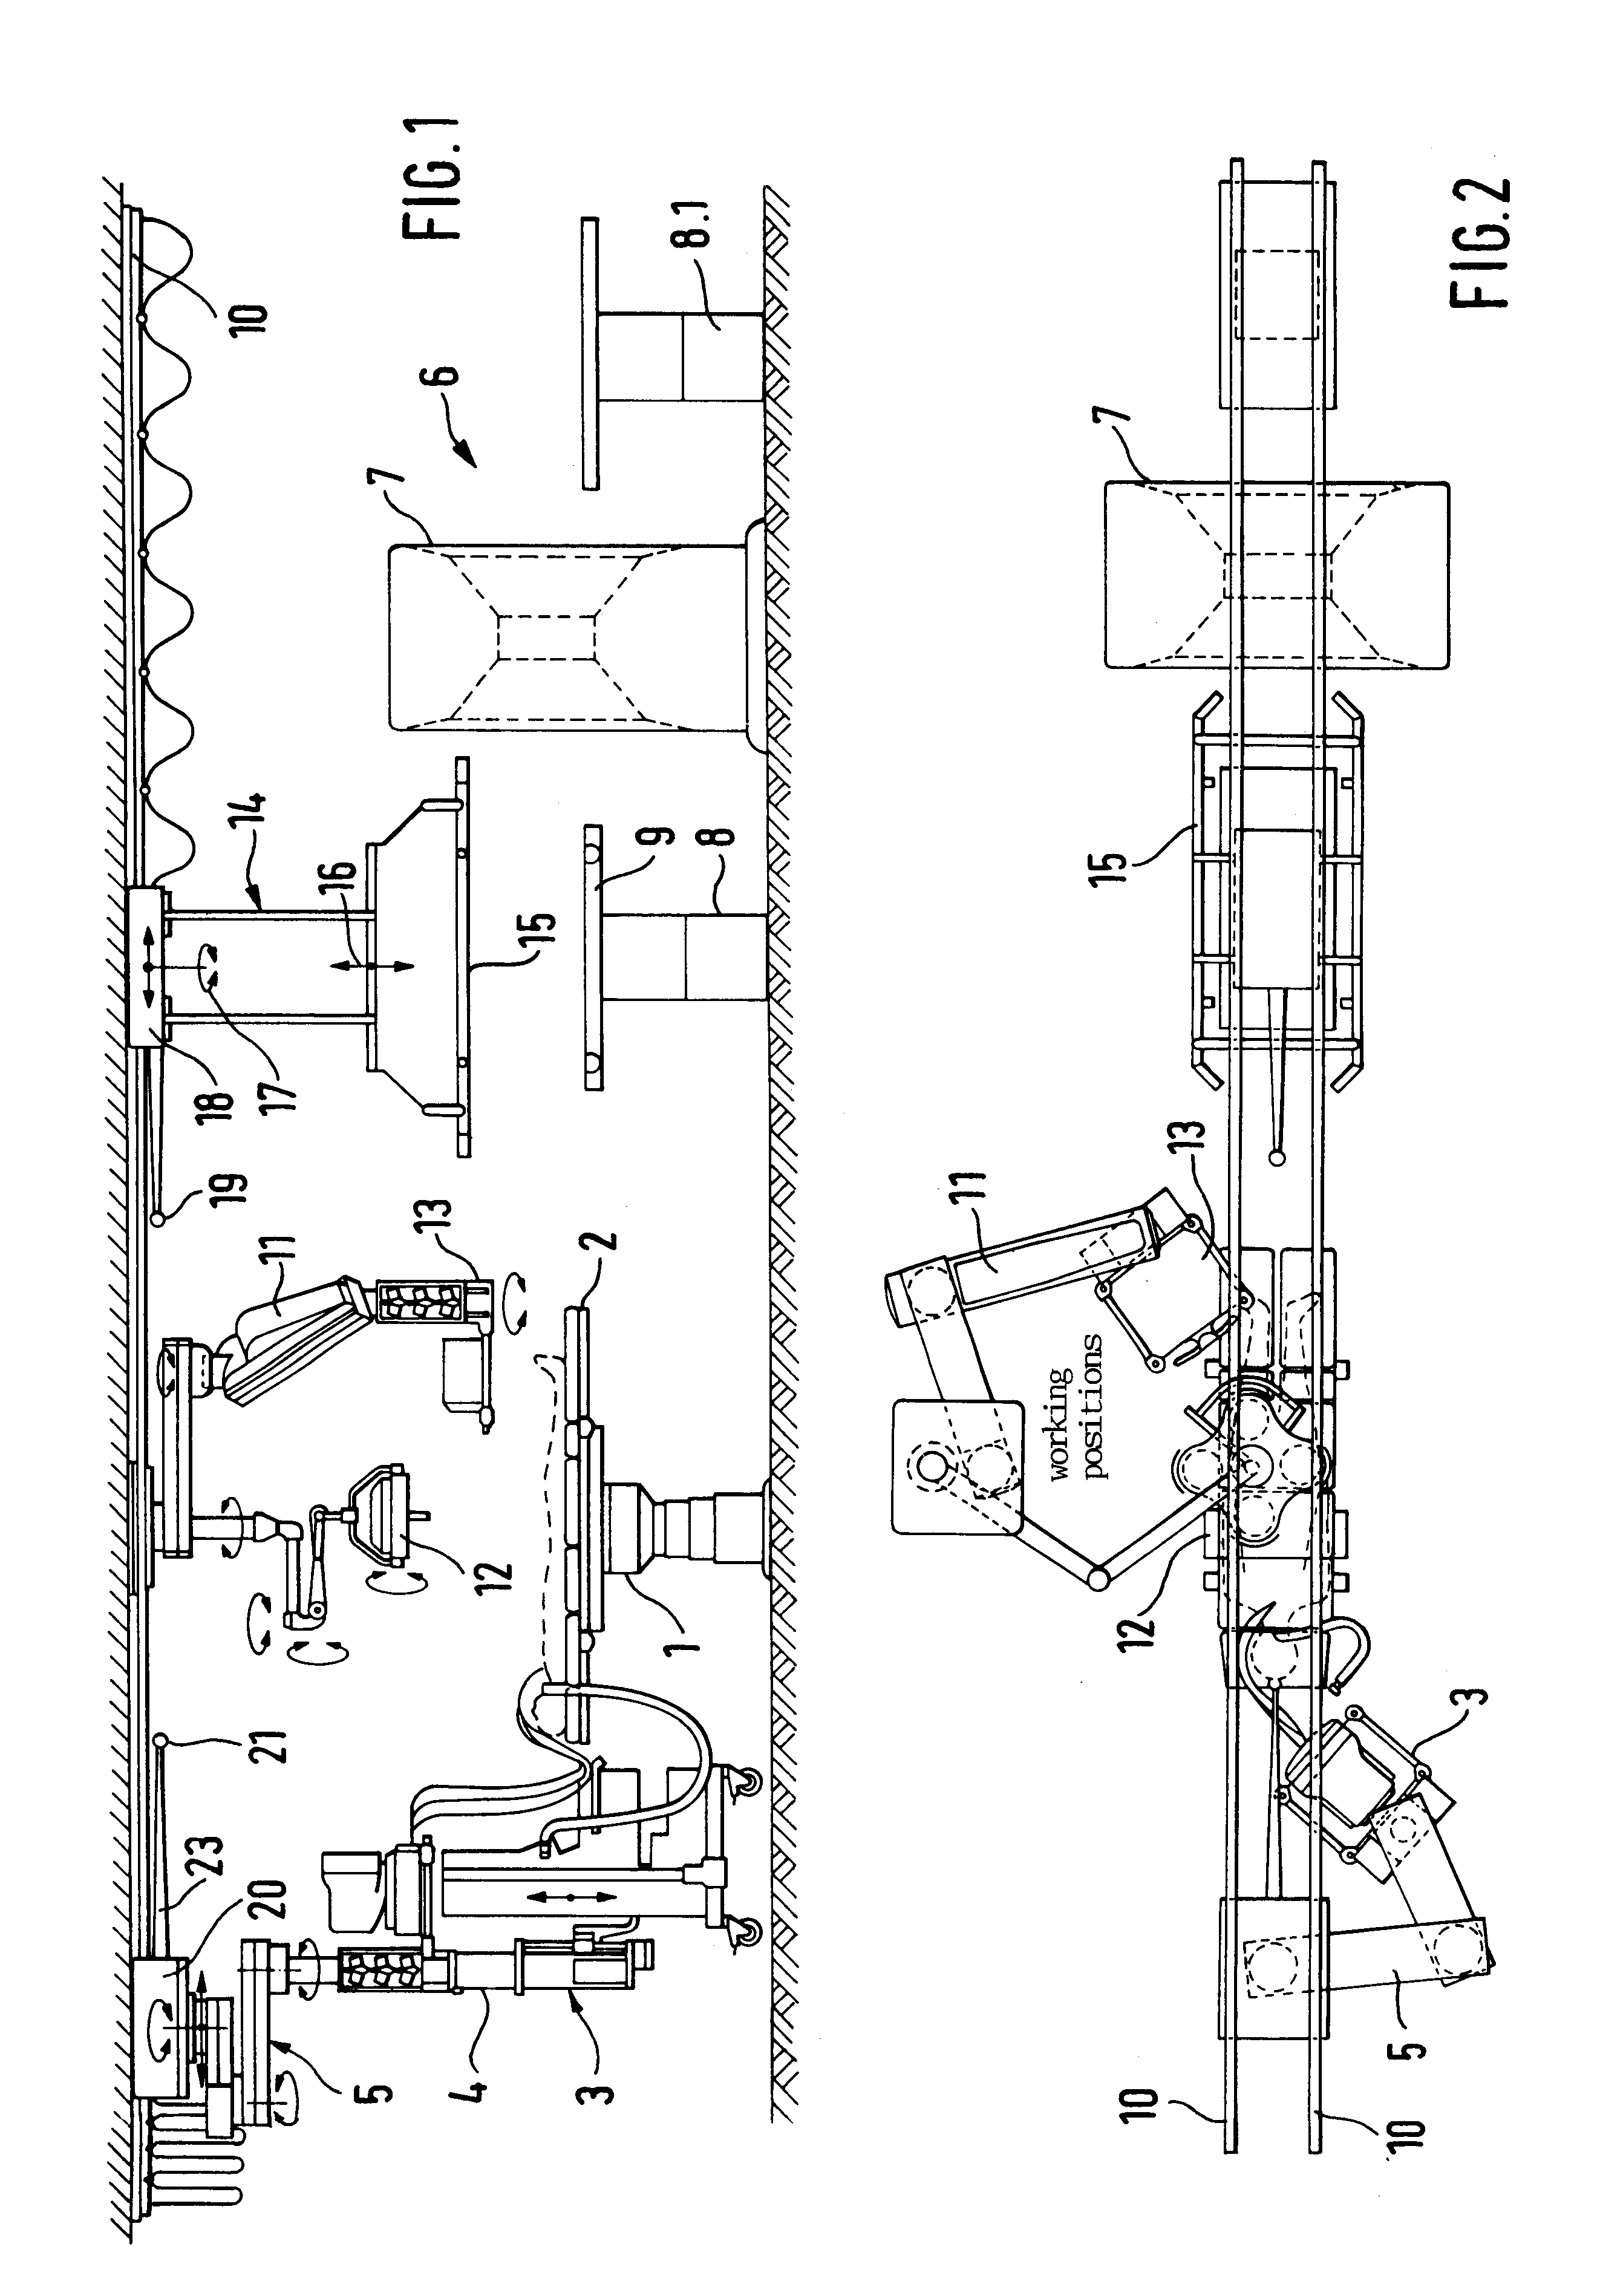 Operating apparatus comprising an operating support post with a detachable operating table top